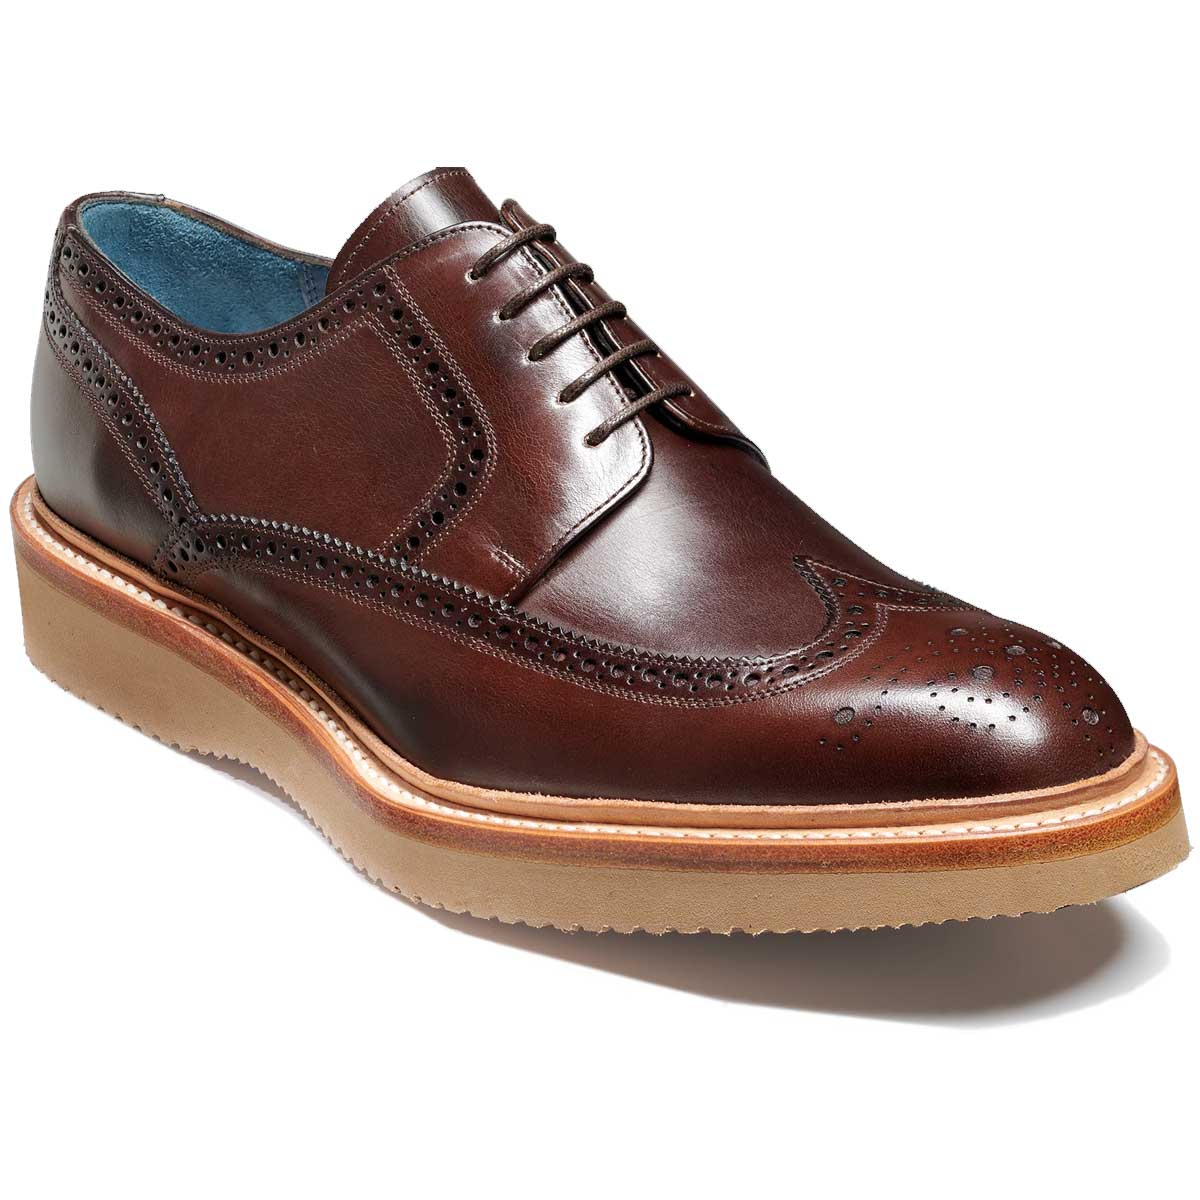 BARKER Bill Shoes - Mens Derby Brogues - Chocolate Hand Painted